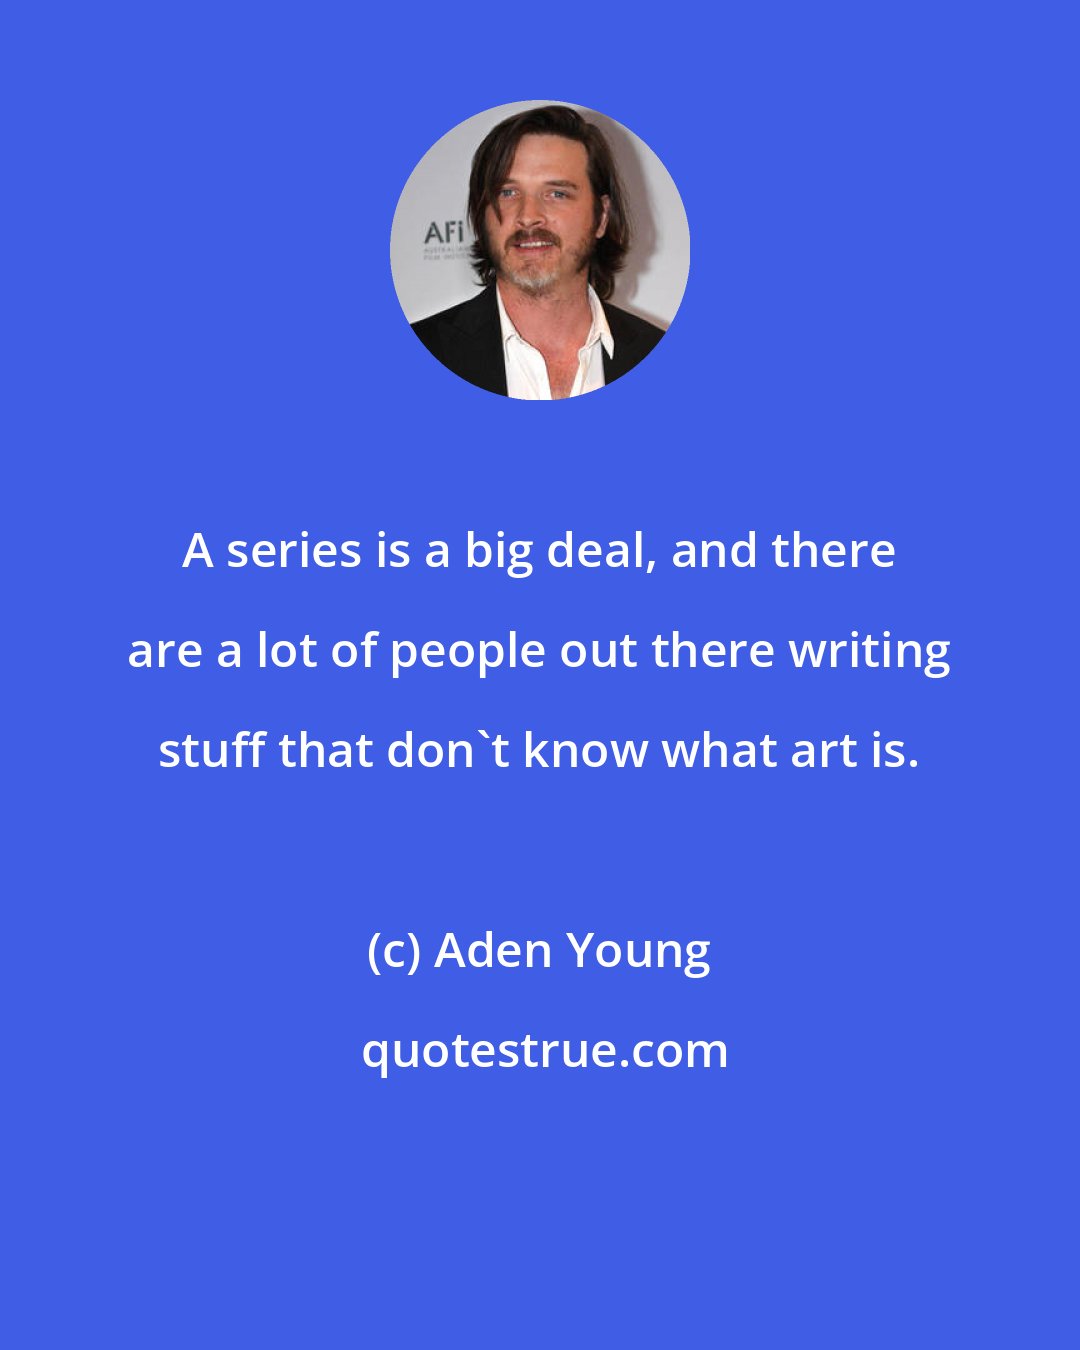 Aden Young: A series is a big deal, and there are a lot of people out there writing stuff that don't know what art is.